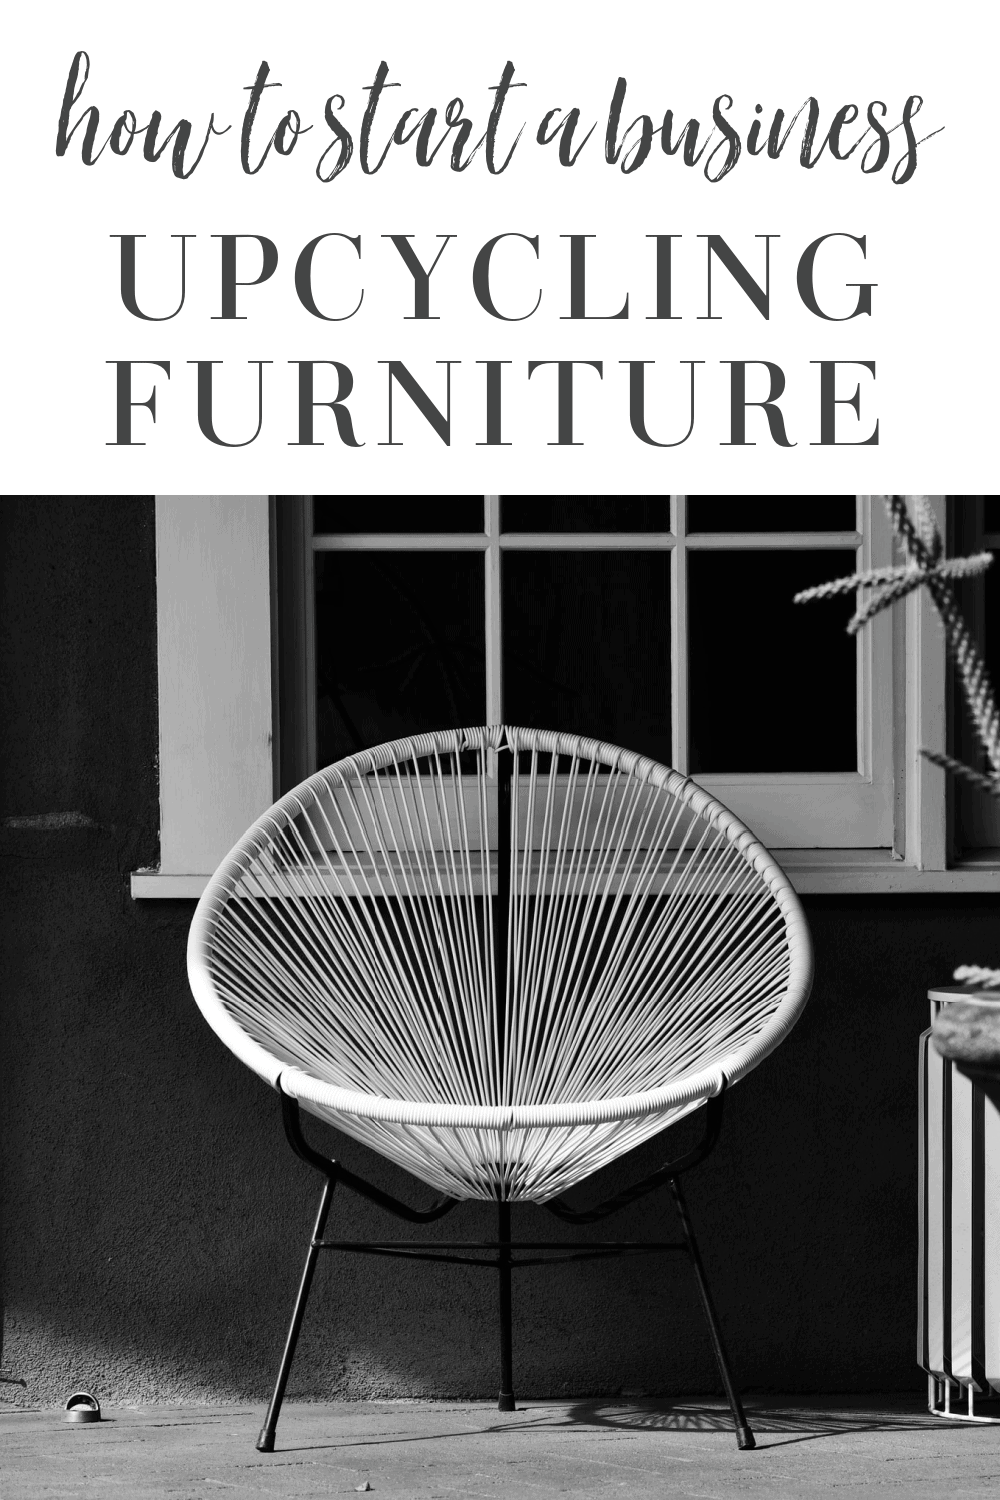 How To Start an Upcycling Furniture Business